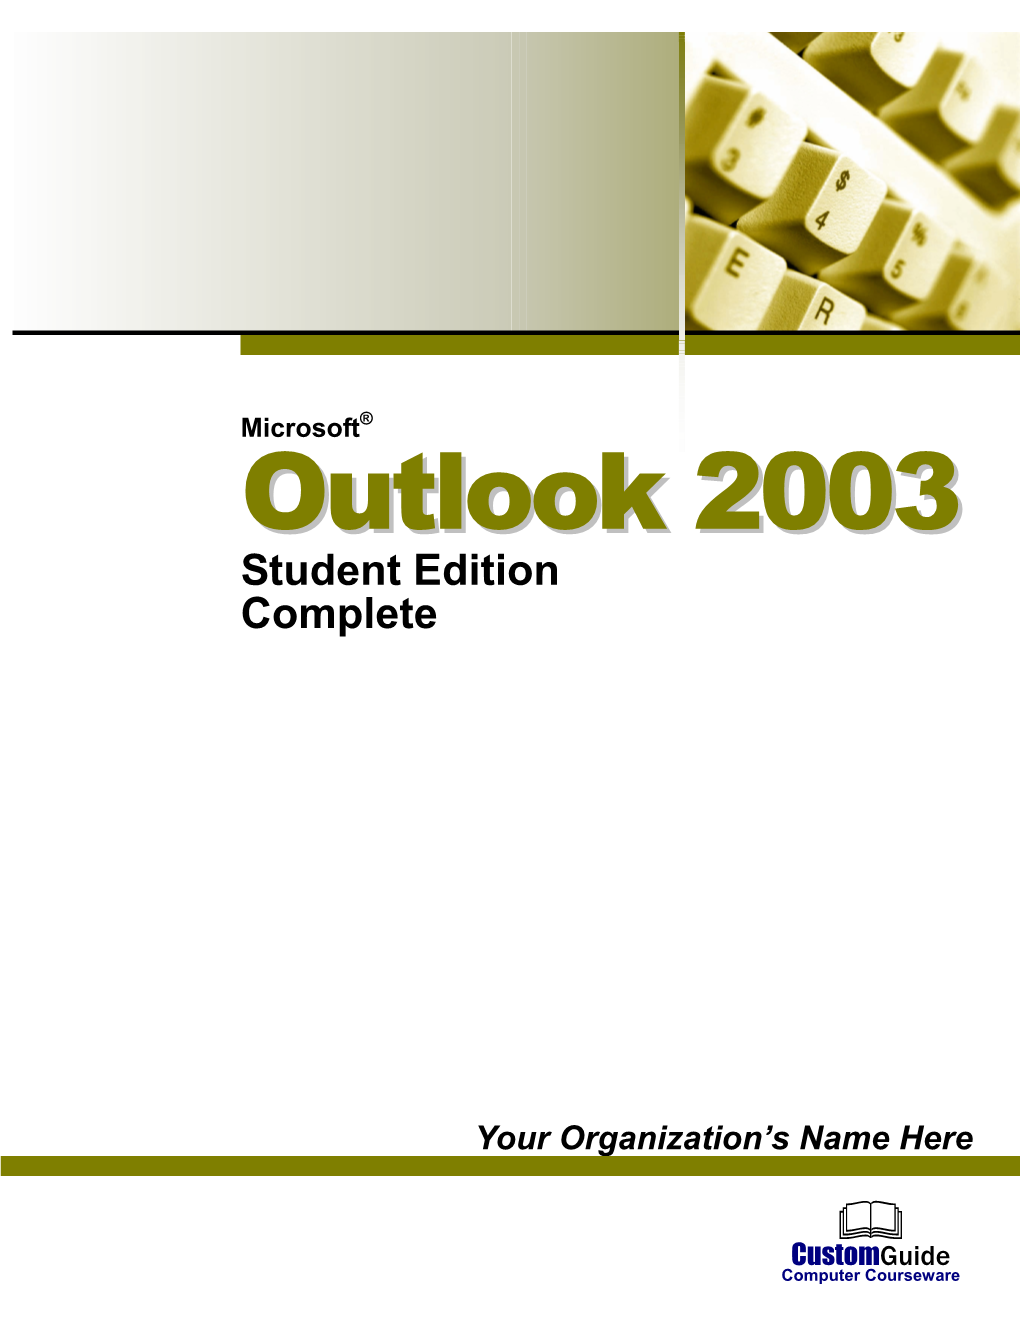 Outlook 2003?